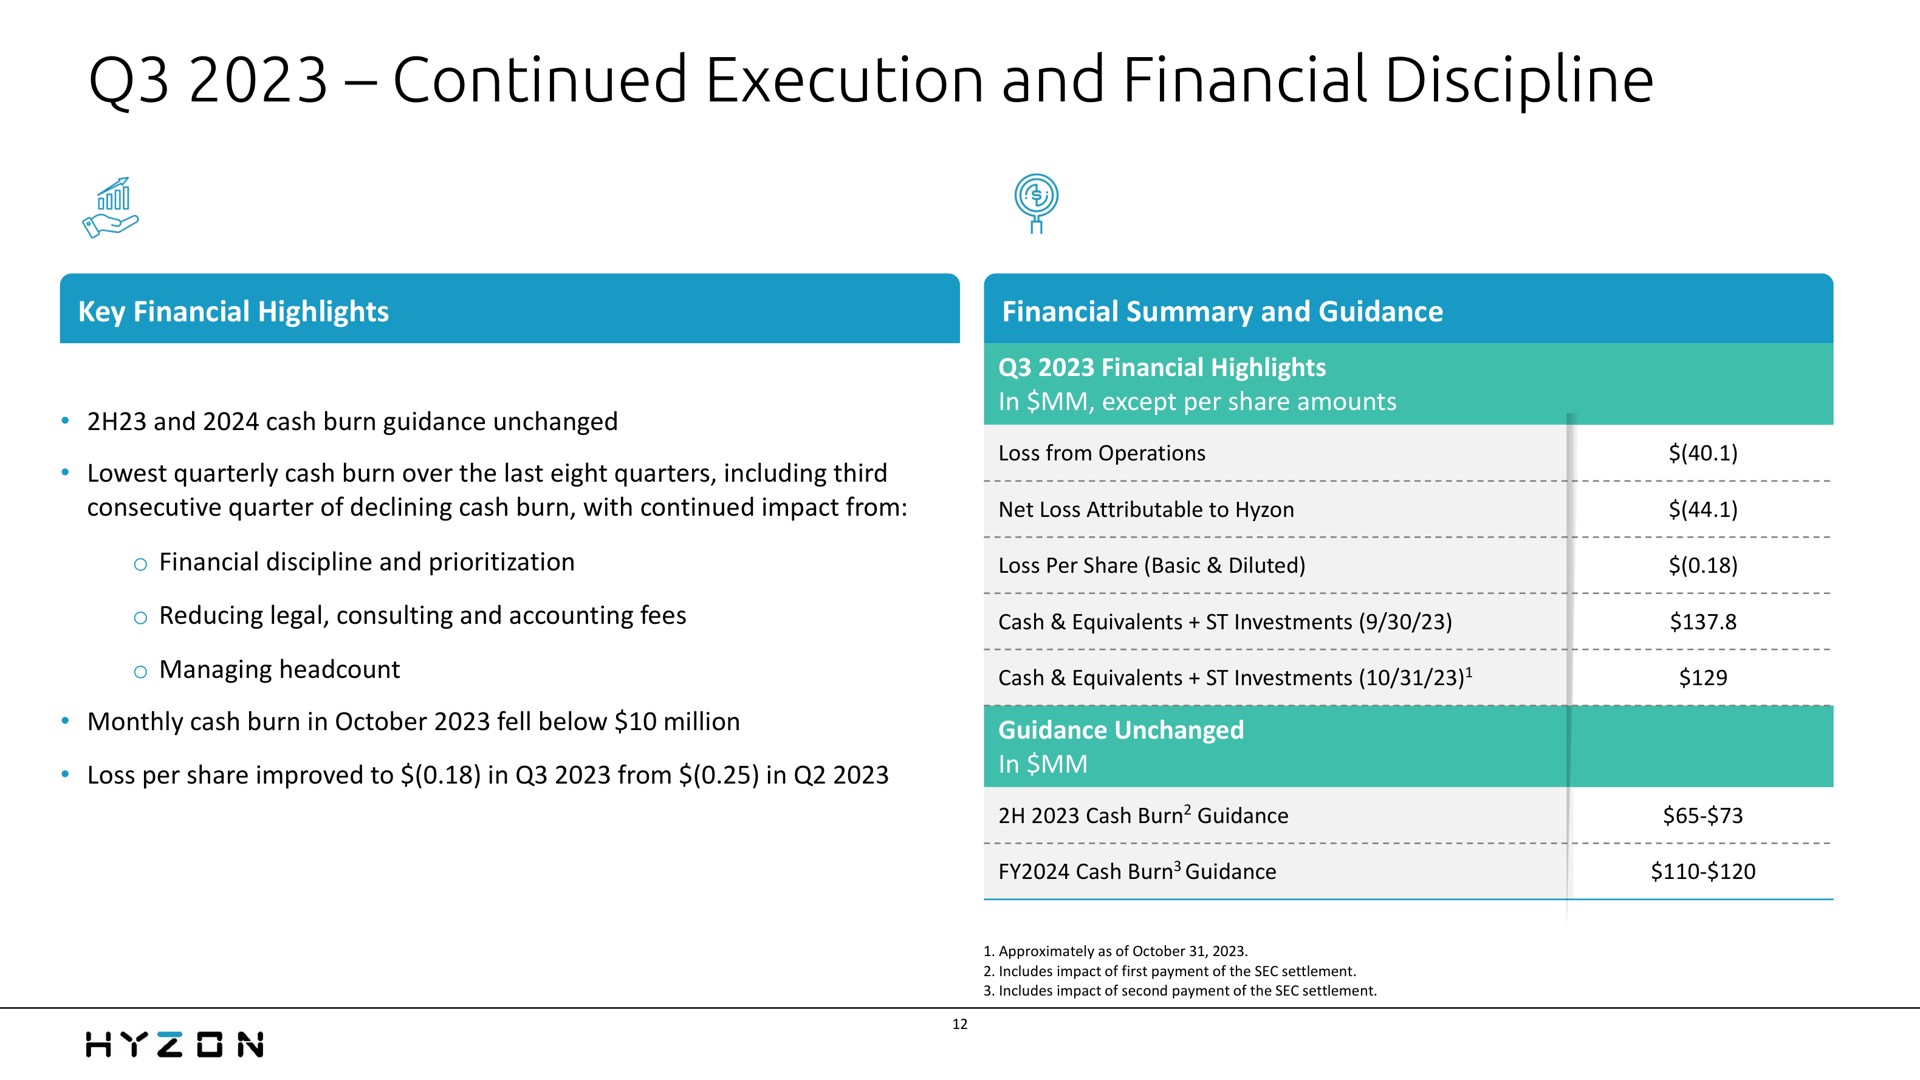 continued execution and financial discipline net loss loss basic equivalents investments cash equivalents investments cash diluted guidance | Hyzon